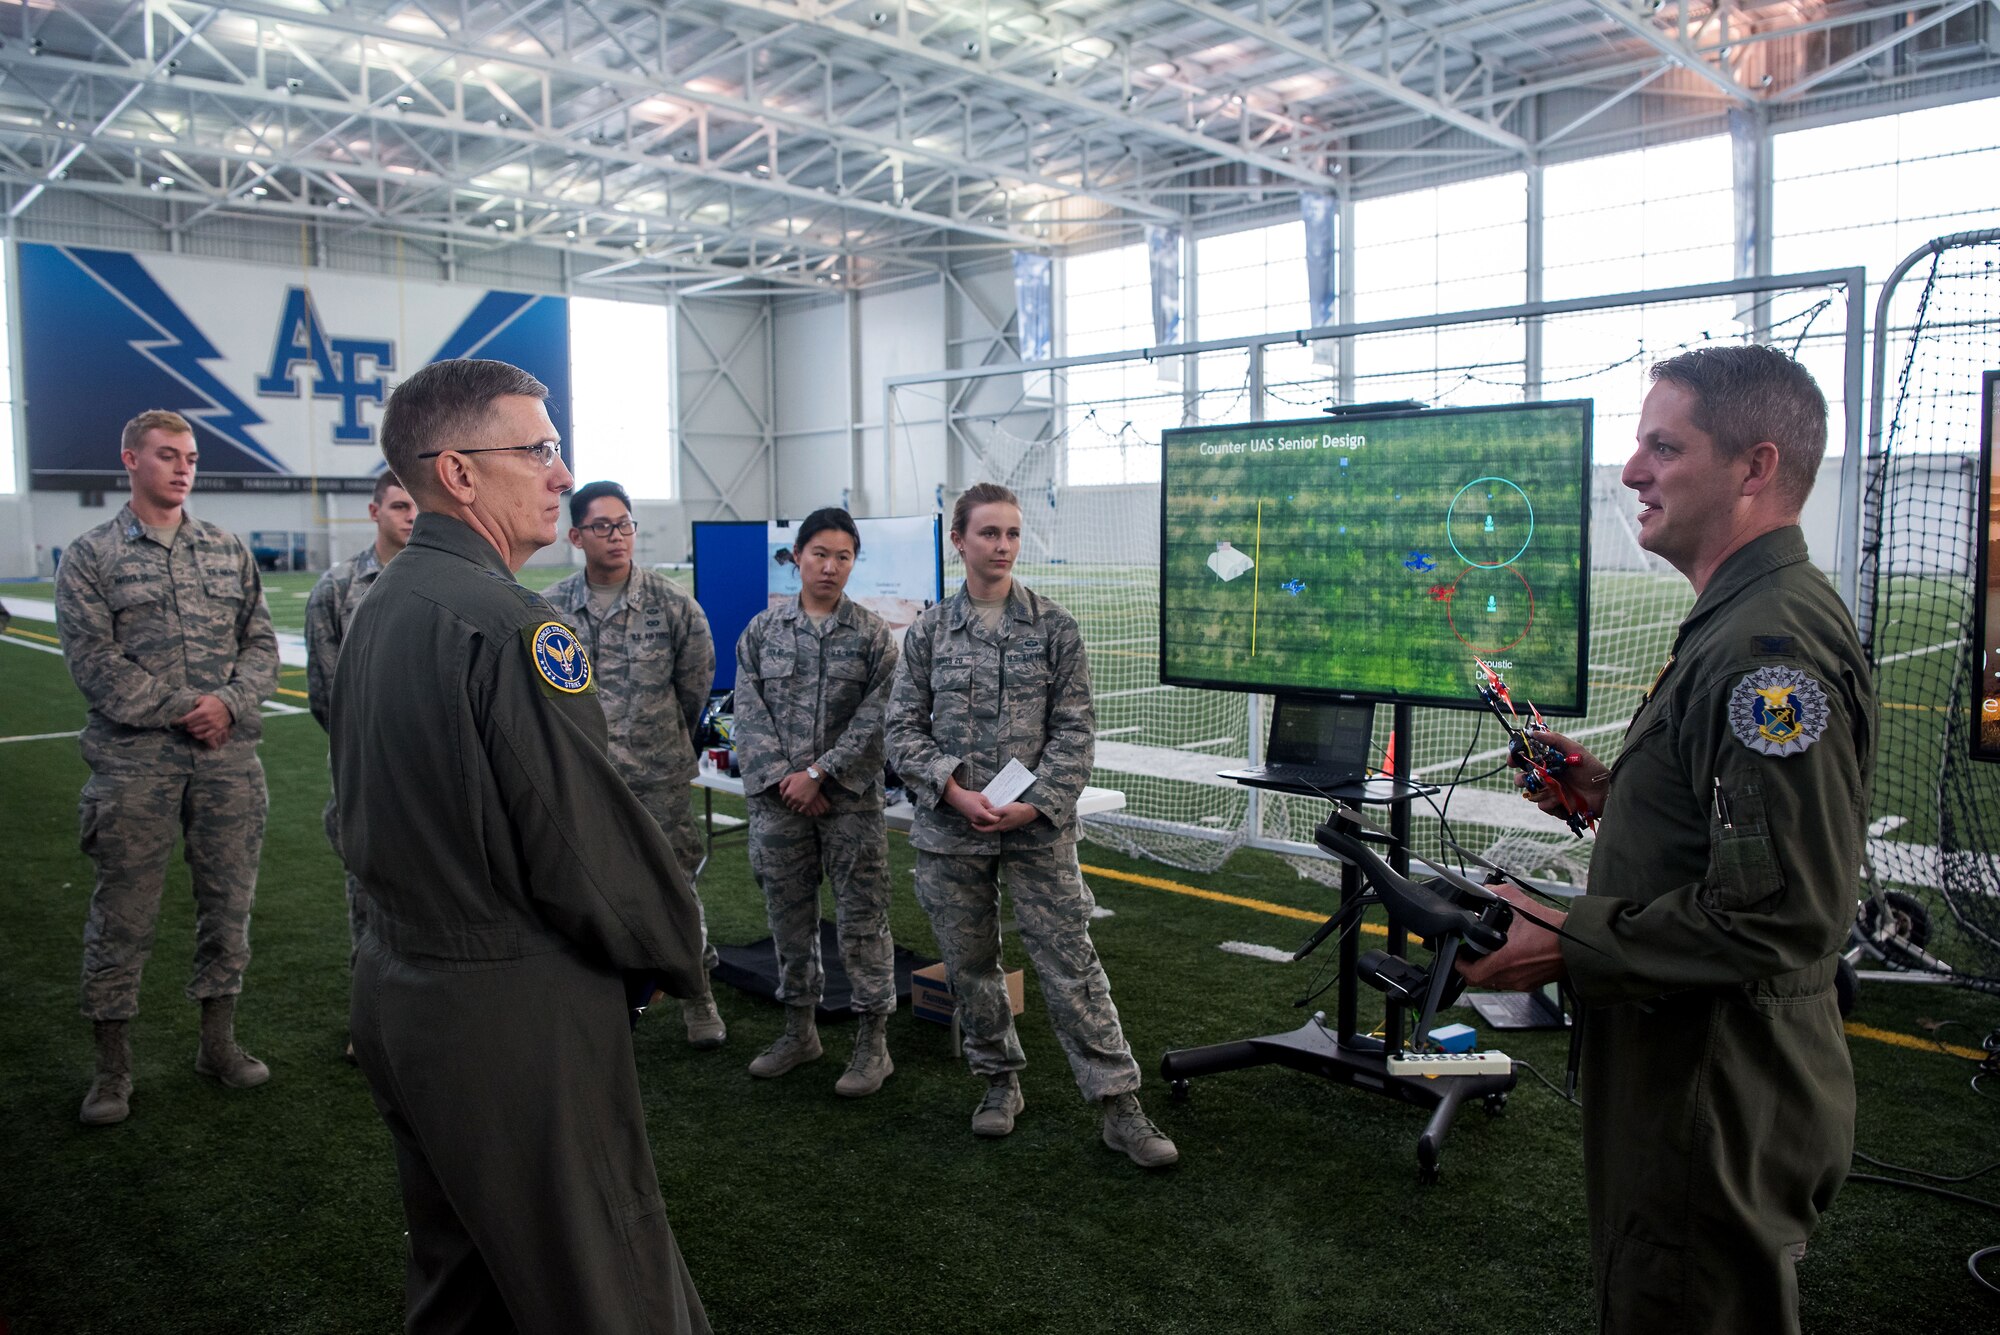 Col. Brian Neff, Head of the Department of Electrical and Computer Engineering, gives Gen. Tim Ray, Air Force Global Strike Command commander, an overview briefing of the Air Force Academy’s Unmanned Aerial Systems program Oct. 2, 2019, at the U.S. Air Force Academy, Colo. The UAS research program serves as a platform for cadets across various disciplines to conduct meaningful research supporting the warfighter within the UAS and Unmanned Aerial Vehicles domain. (U.S. Air Force photo by Trevor Cokley)